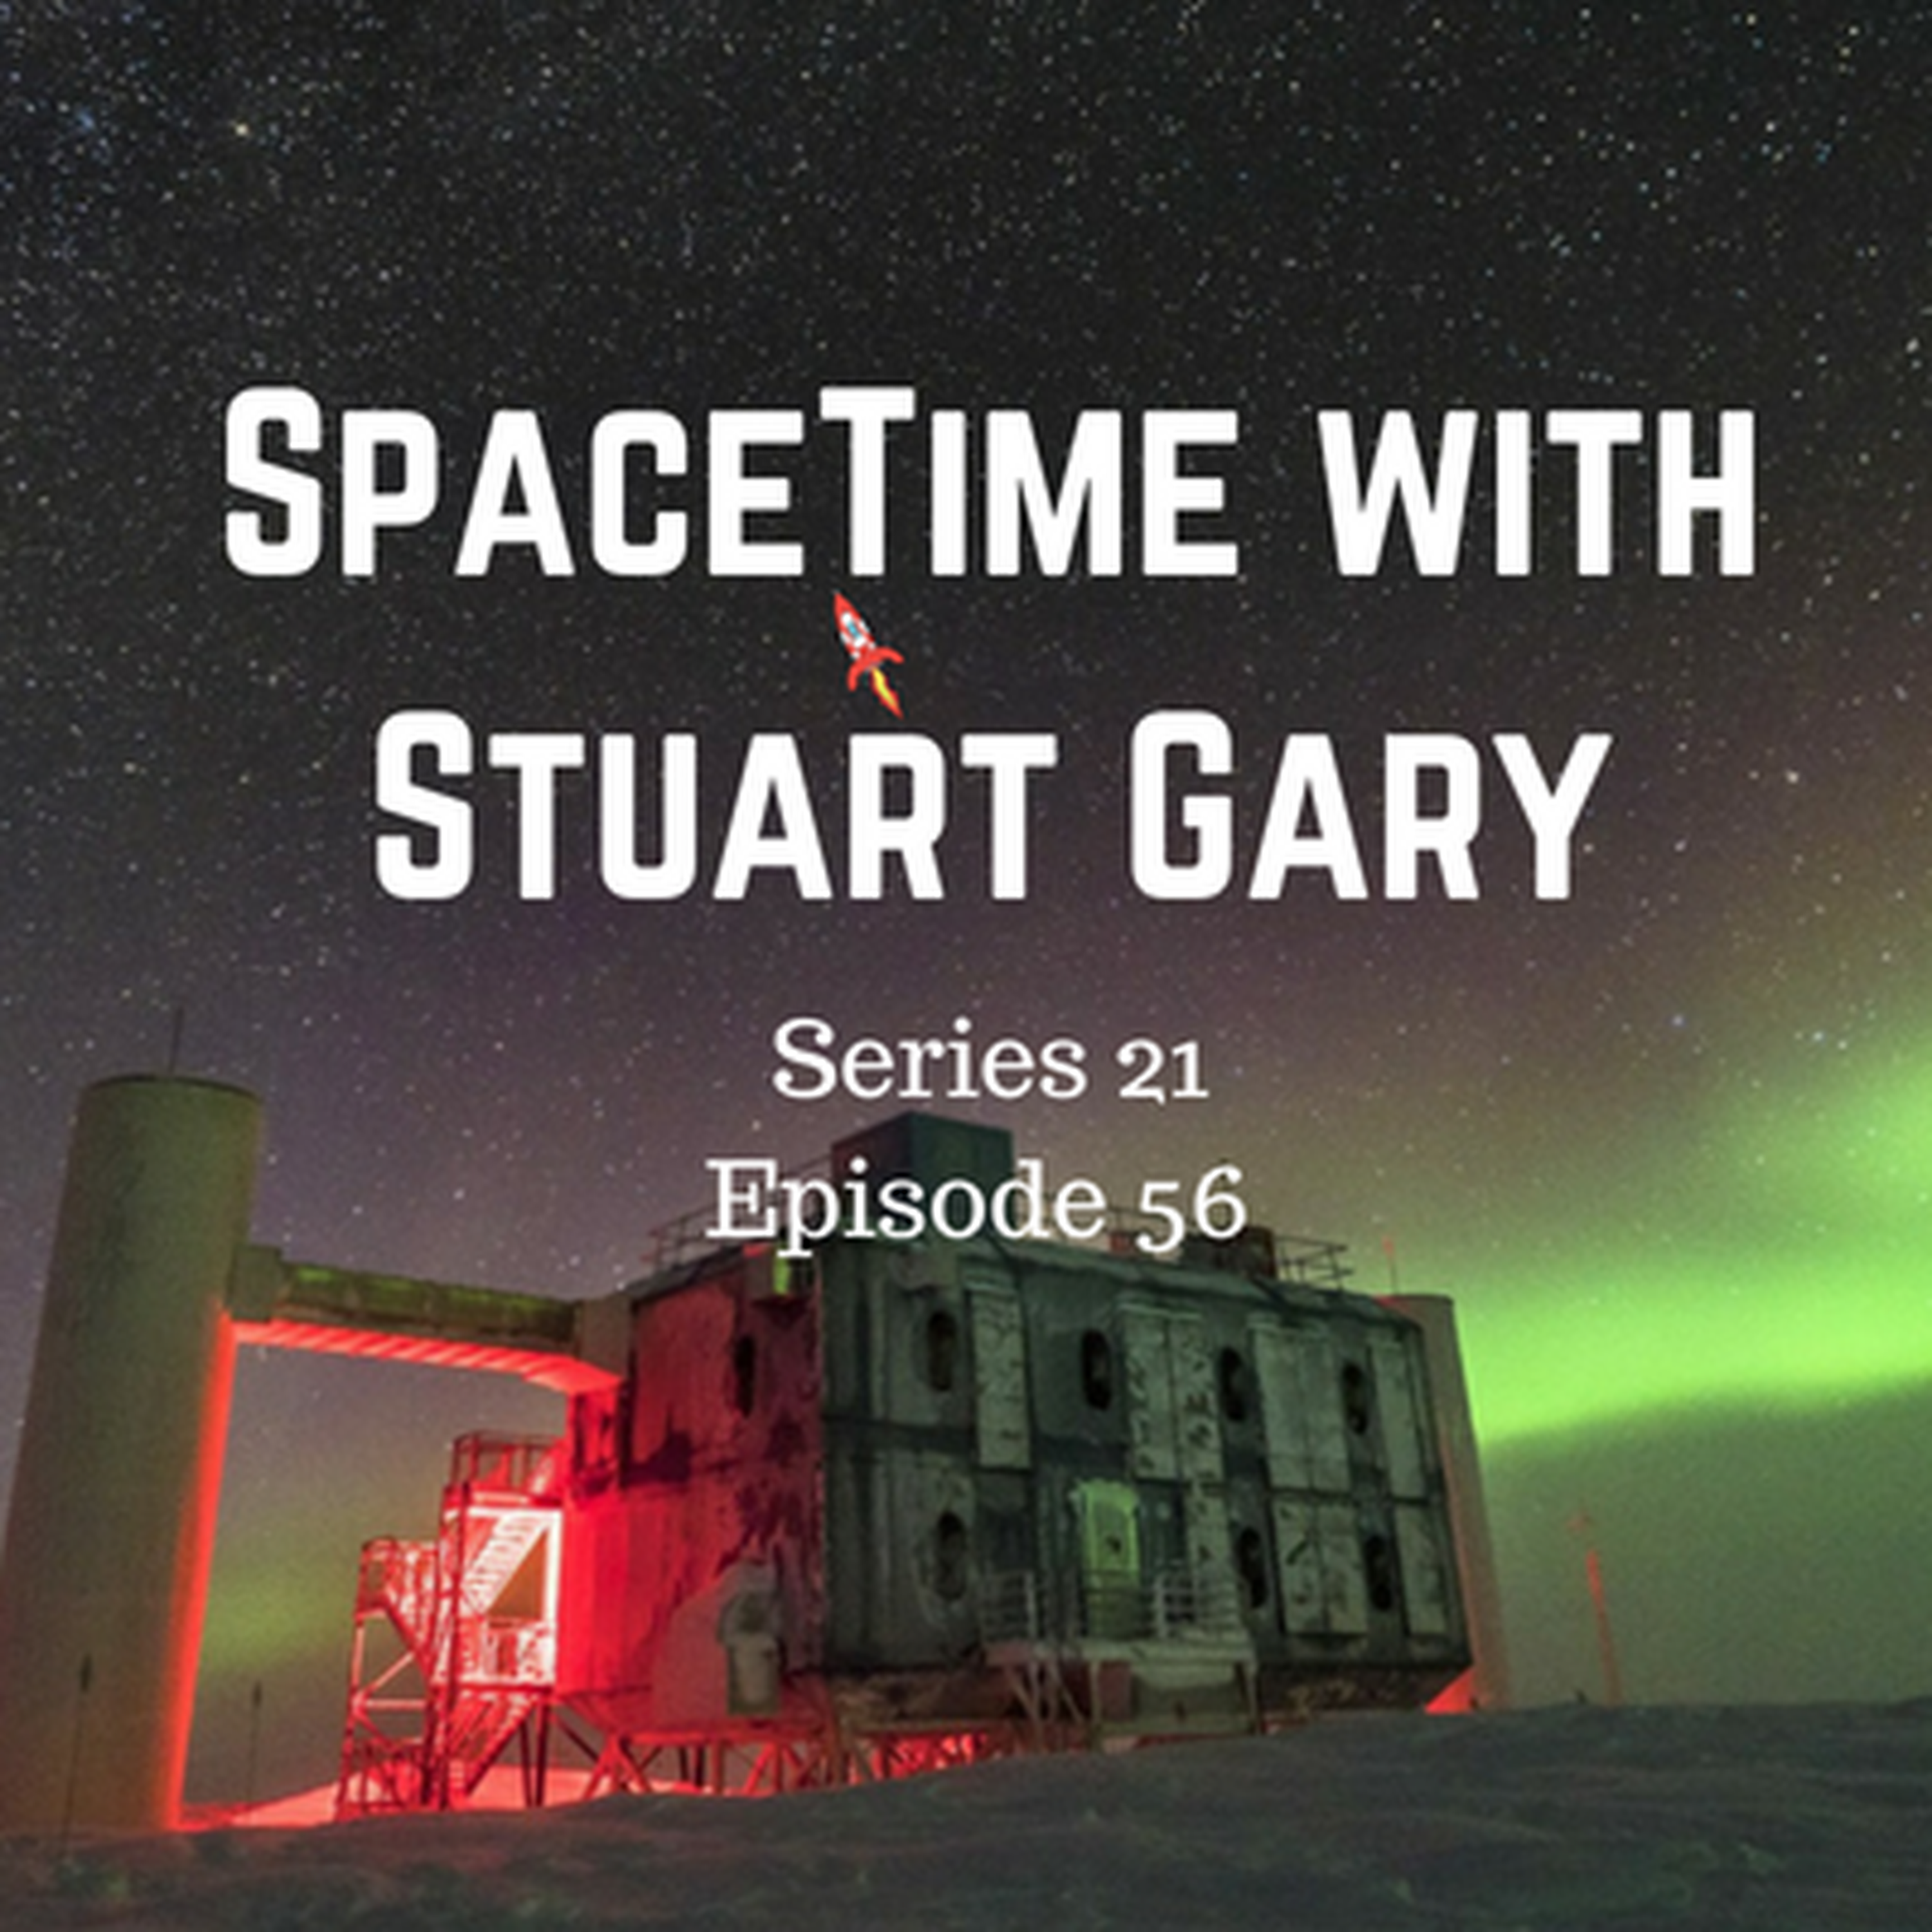 56: Cosmic ray neutrinos traced back to their source - SpaceTime with Stuart Gary S21E56